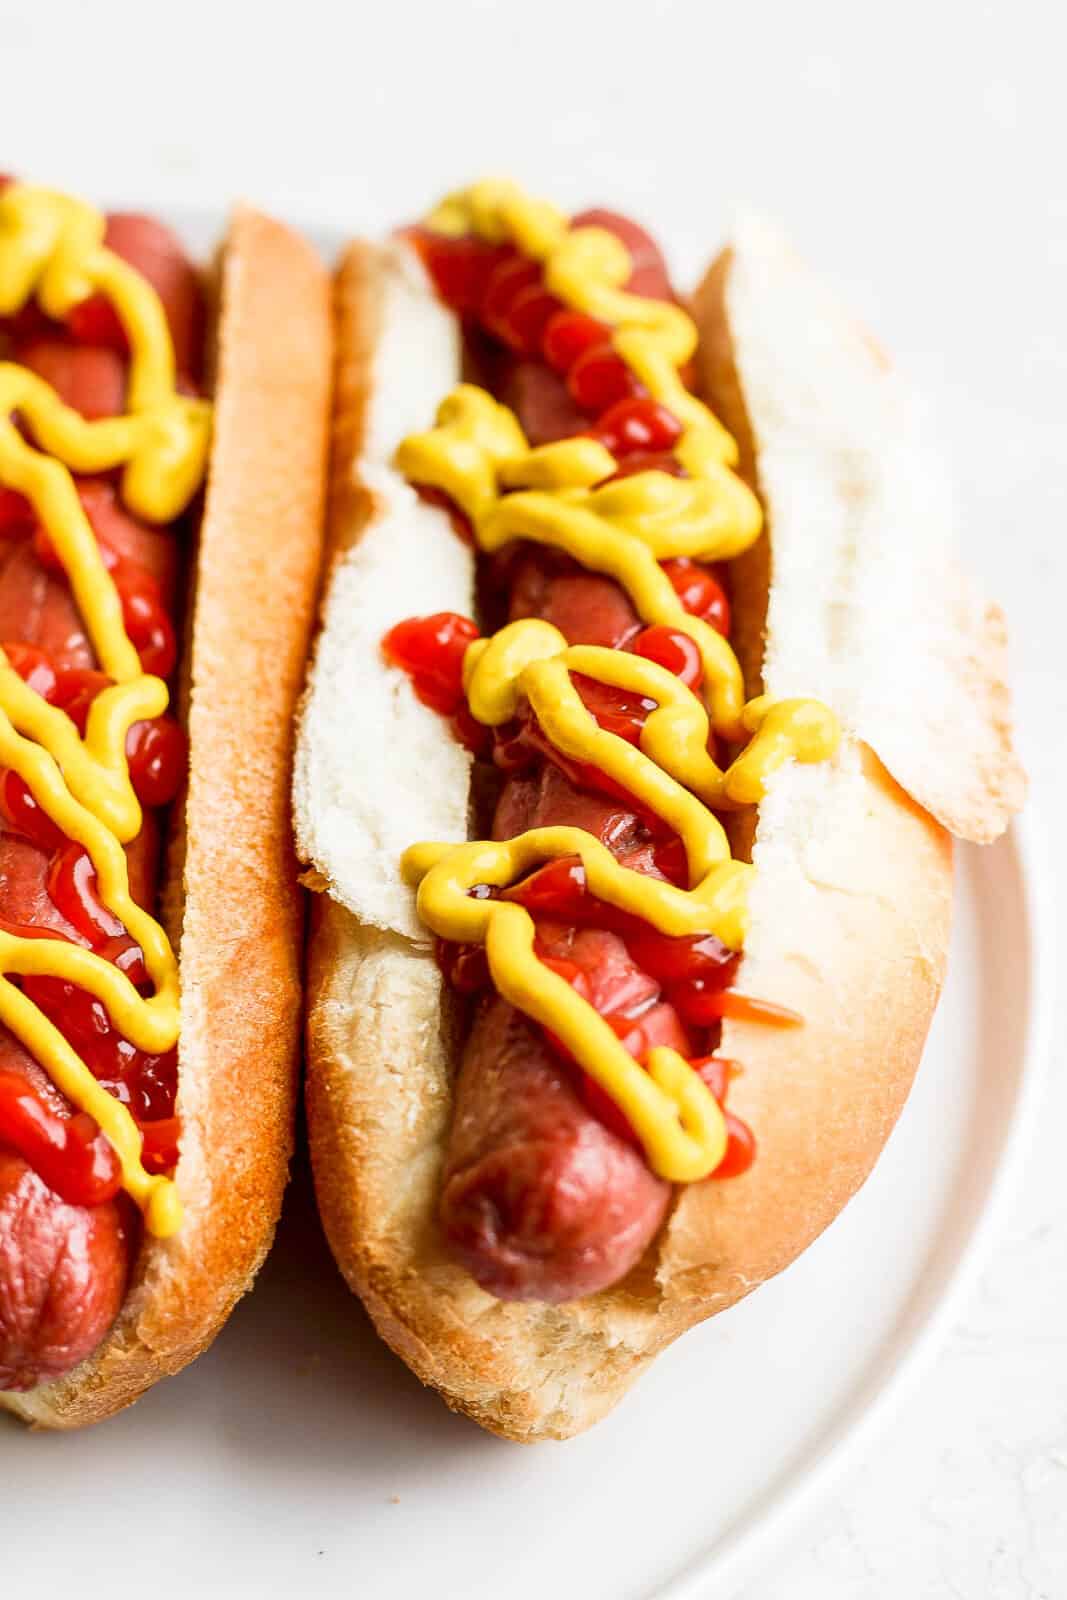 Air fried hot dogs in buns with ketchup and mustard.